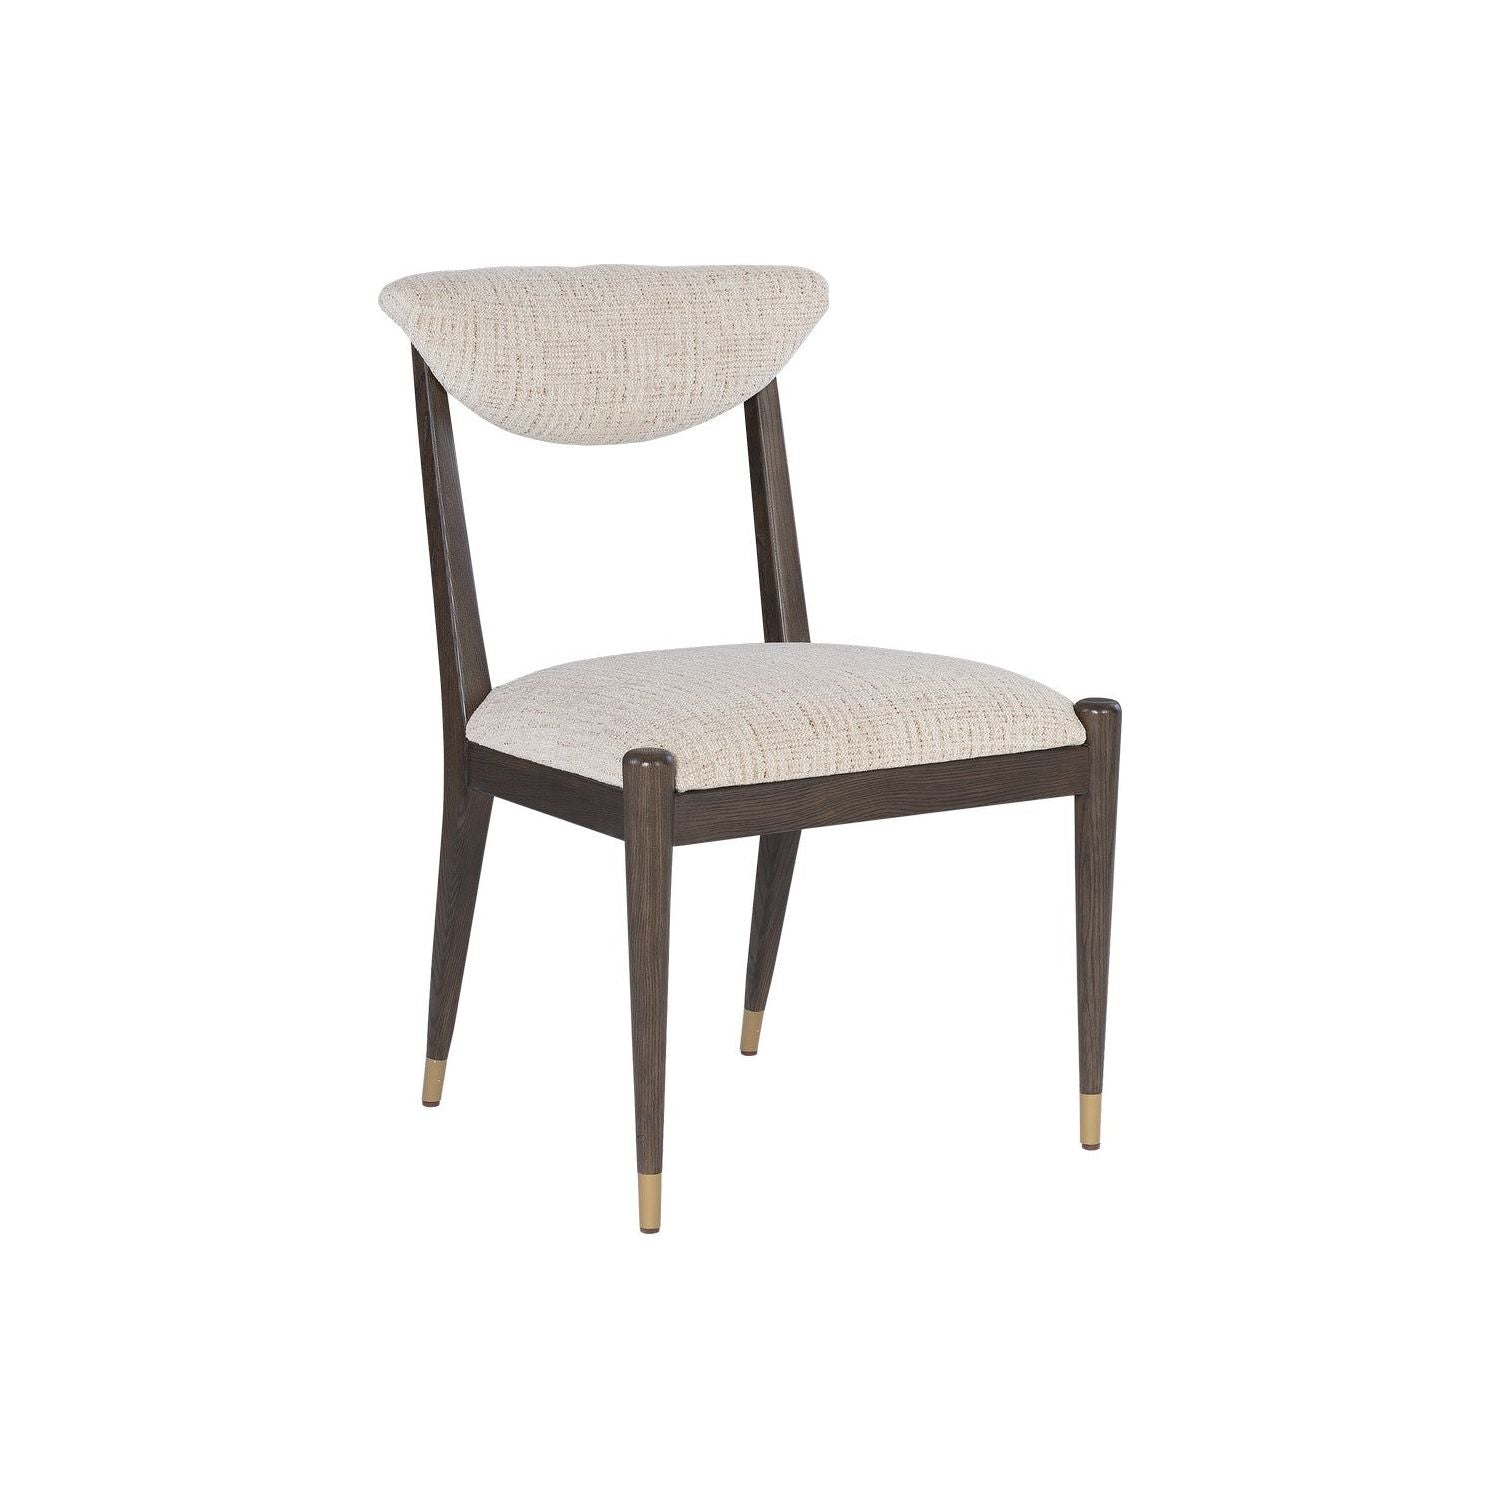 Currey and Company - 7000-0962 - Side Chair - Coffee Brown/Antique Brass